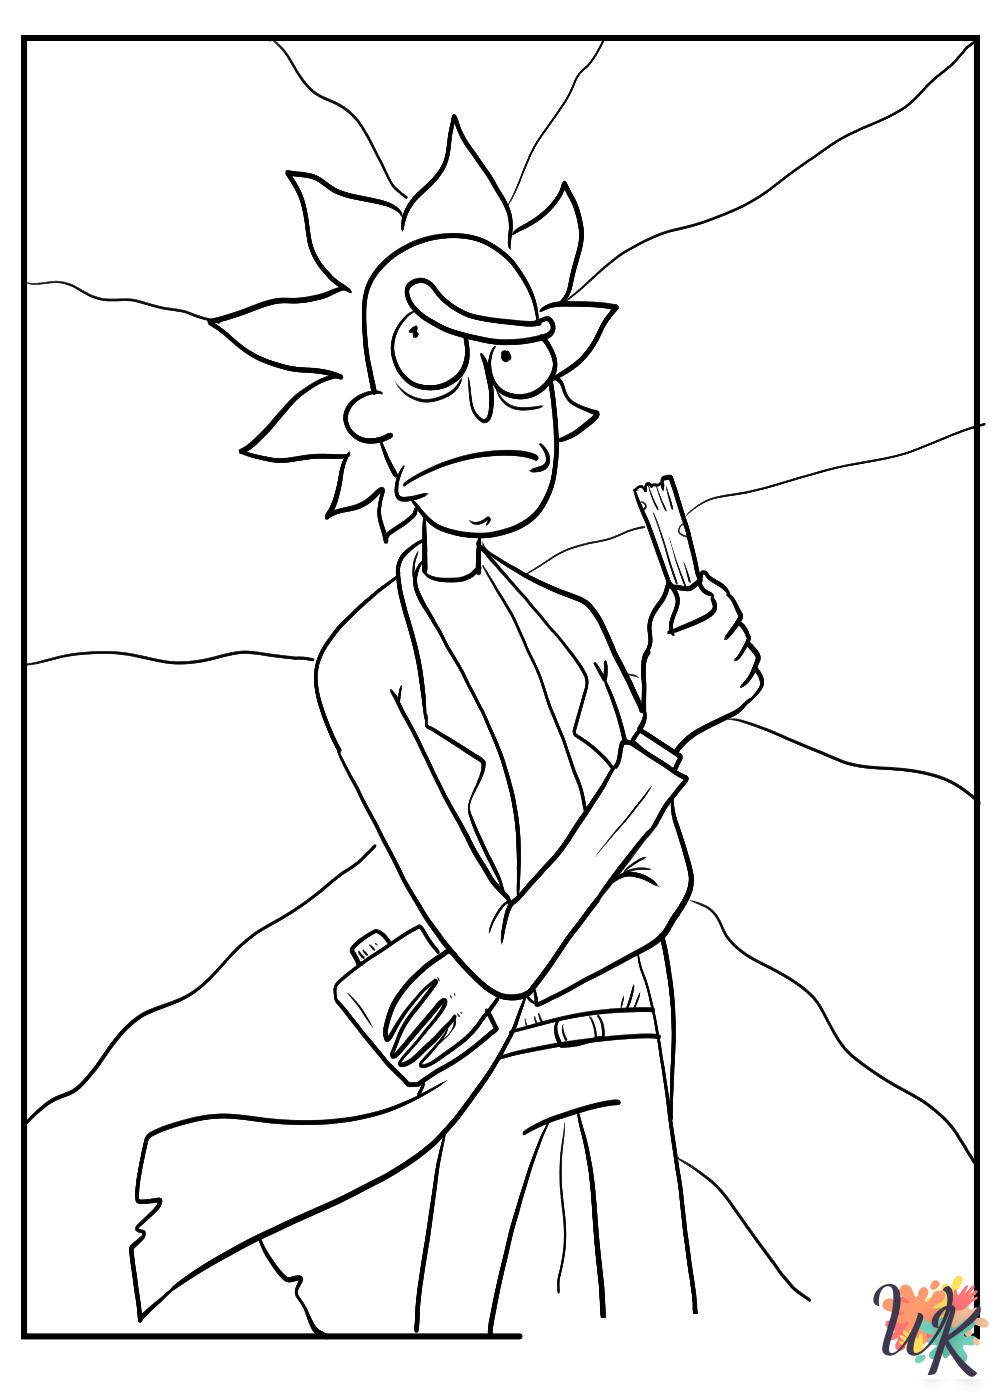 printable Rick and Morty coloring pages for adults